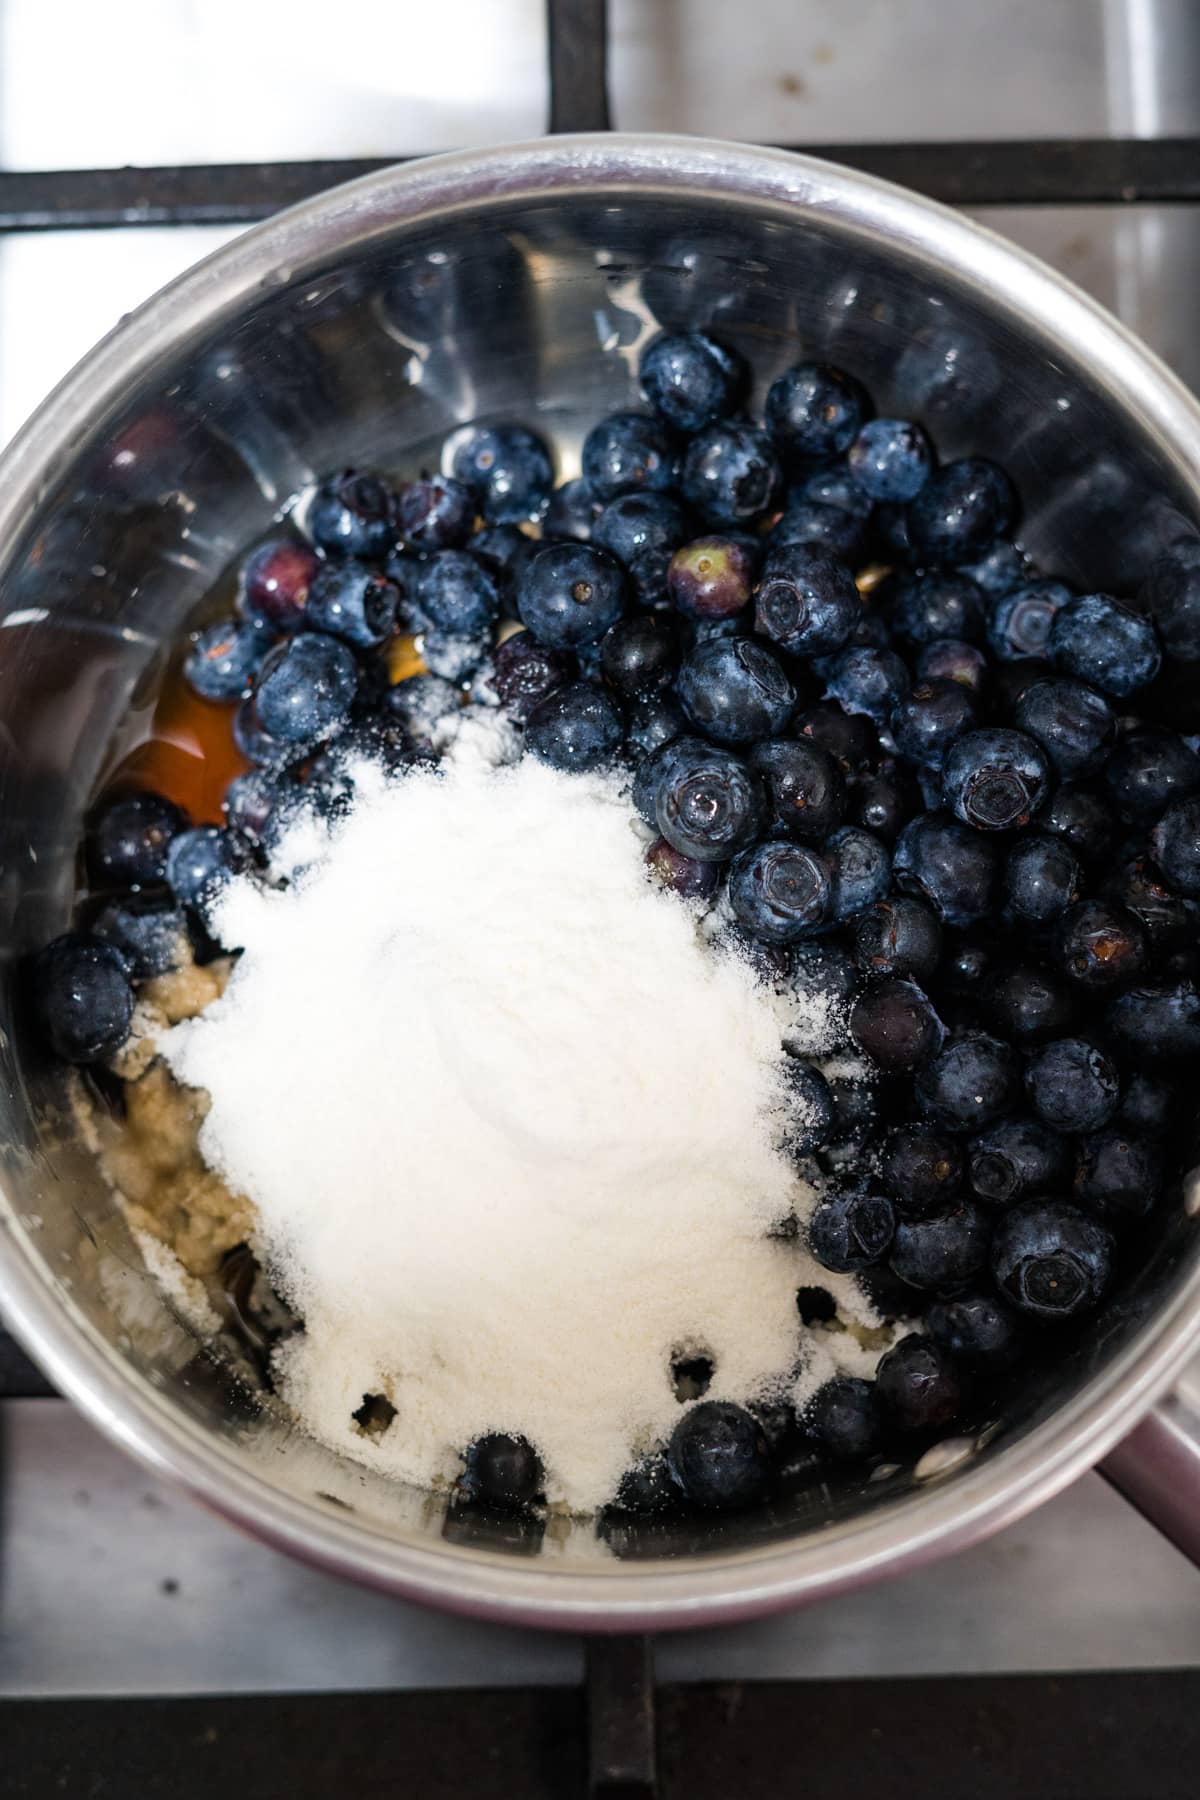 The ingredients for keto blueberry pancakes are in a pan on the stove.